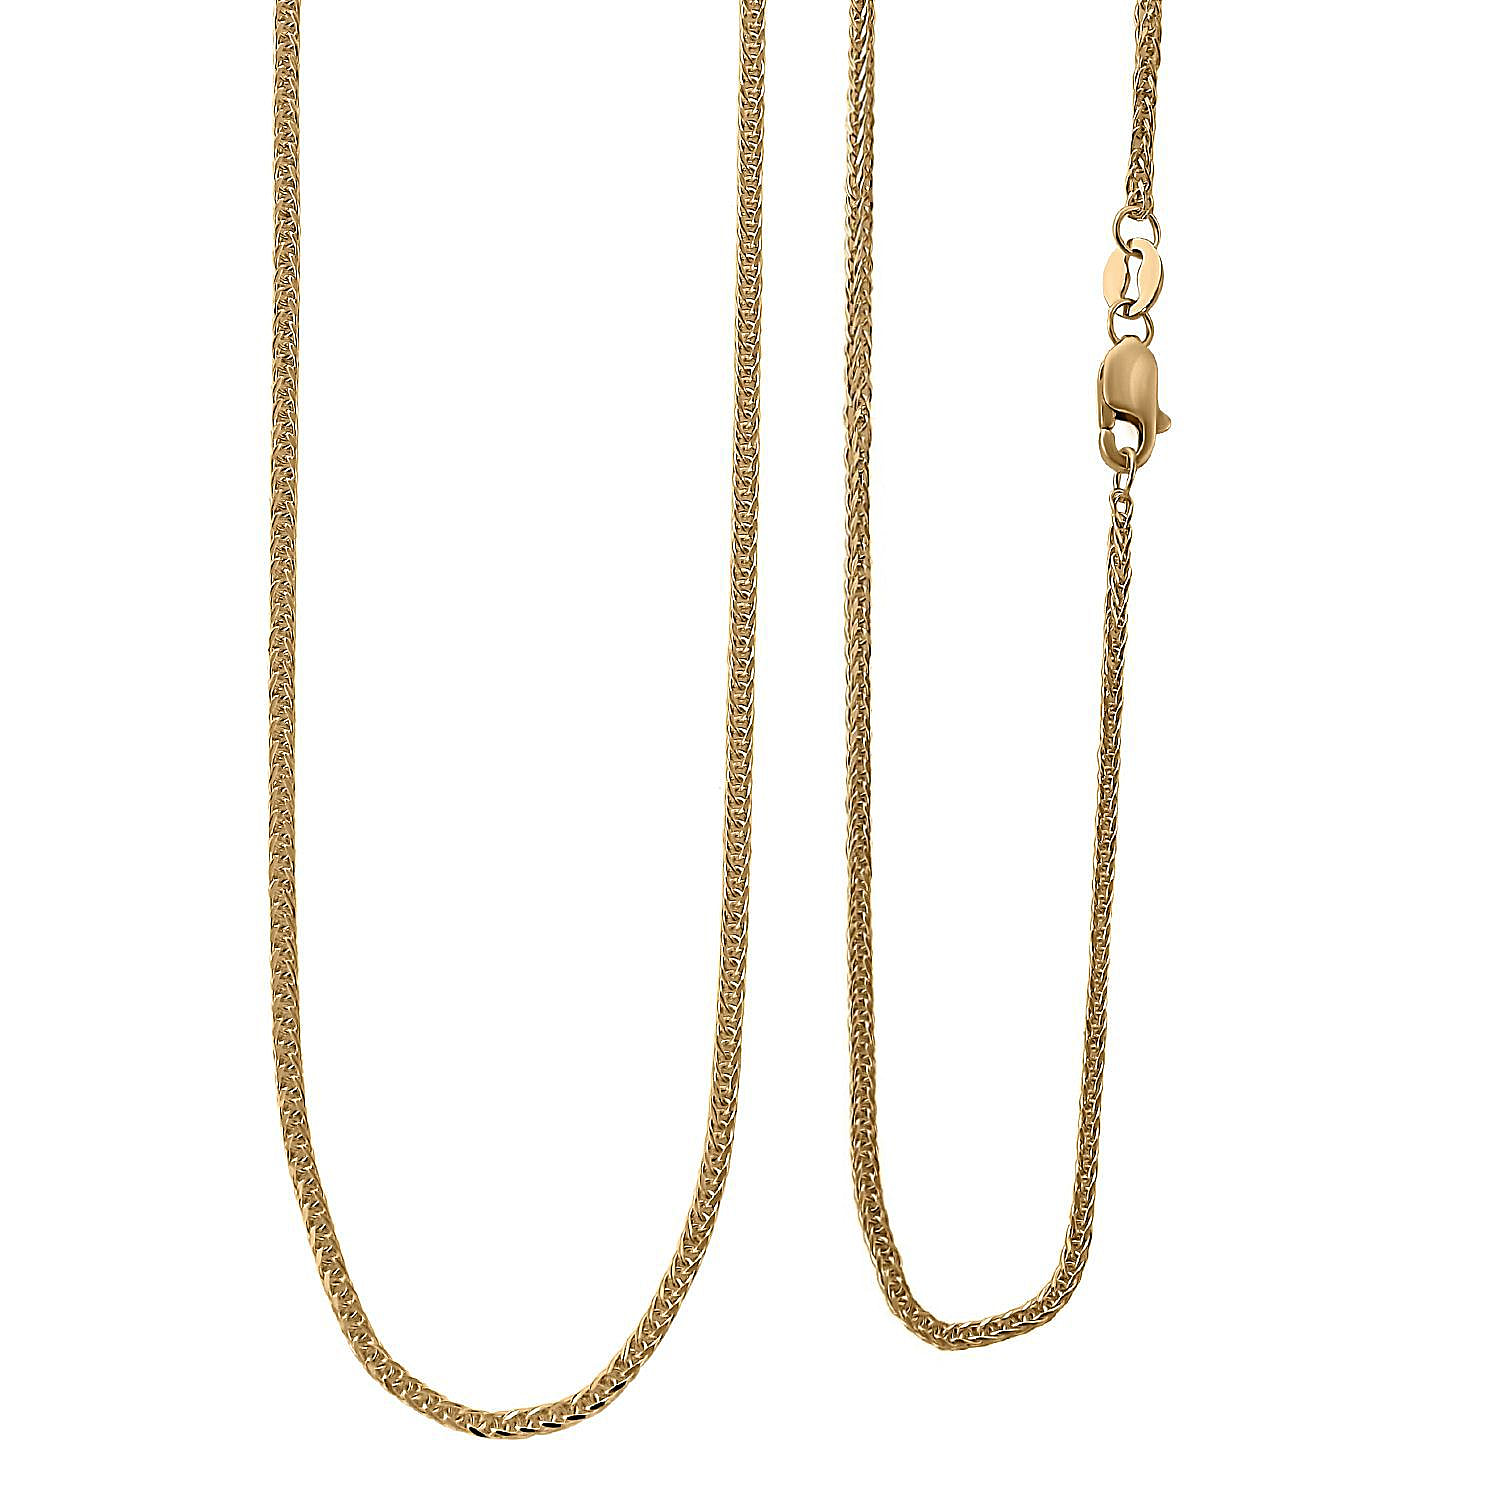 One Time Closeout - 9K Yellow Gold SPIGA Necklace (Size - 20)